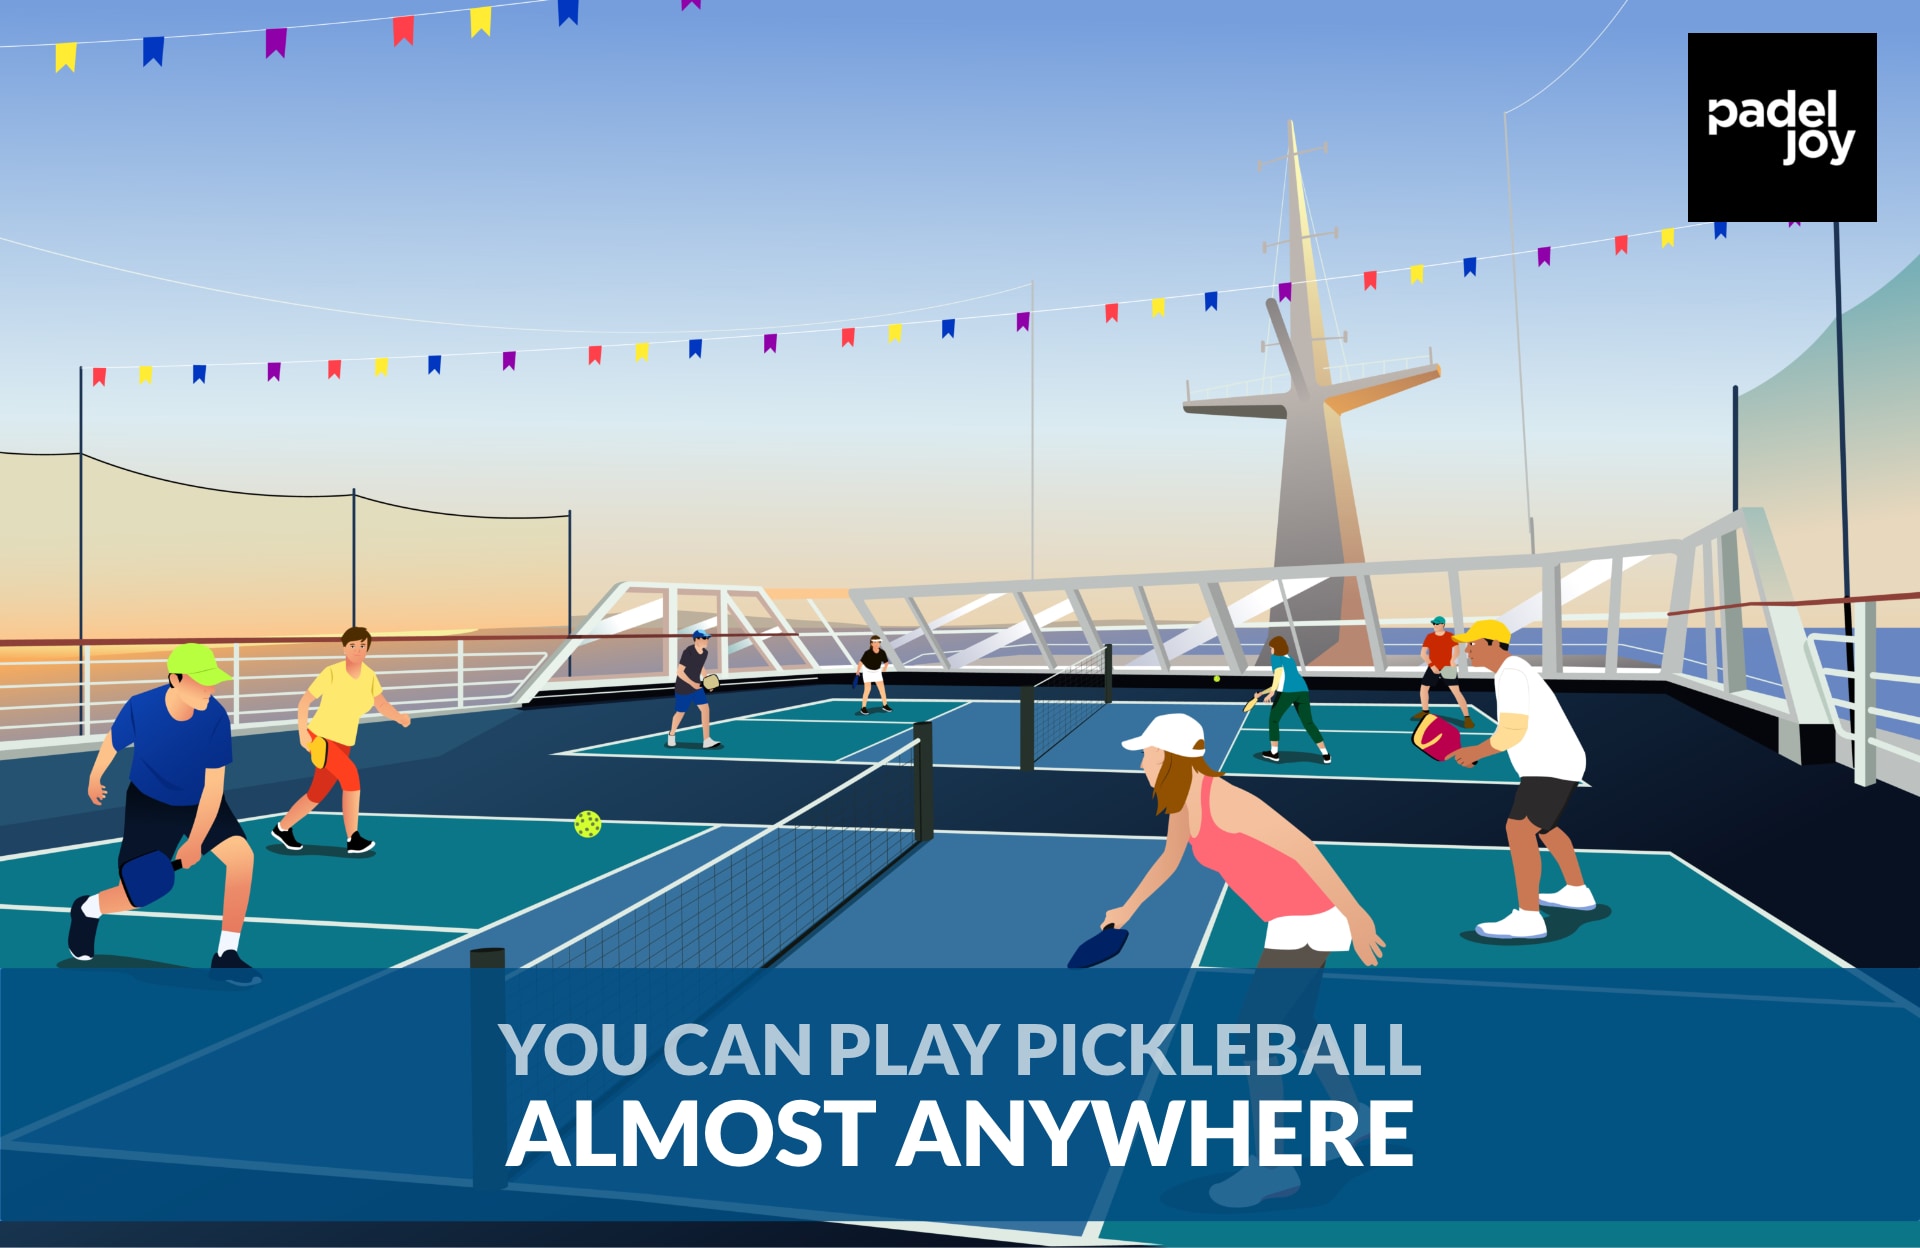 Pickleball is a portable sport, here it is played on a cruising ship.